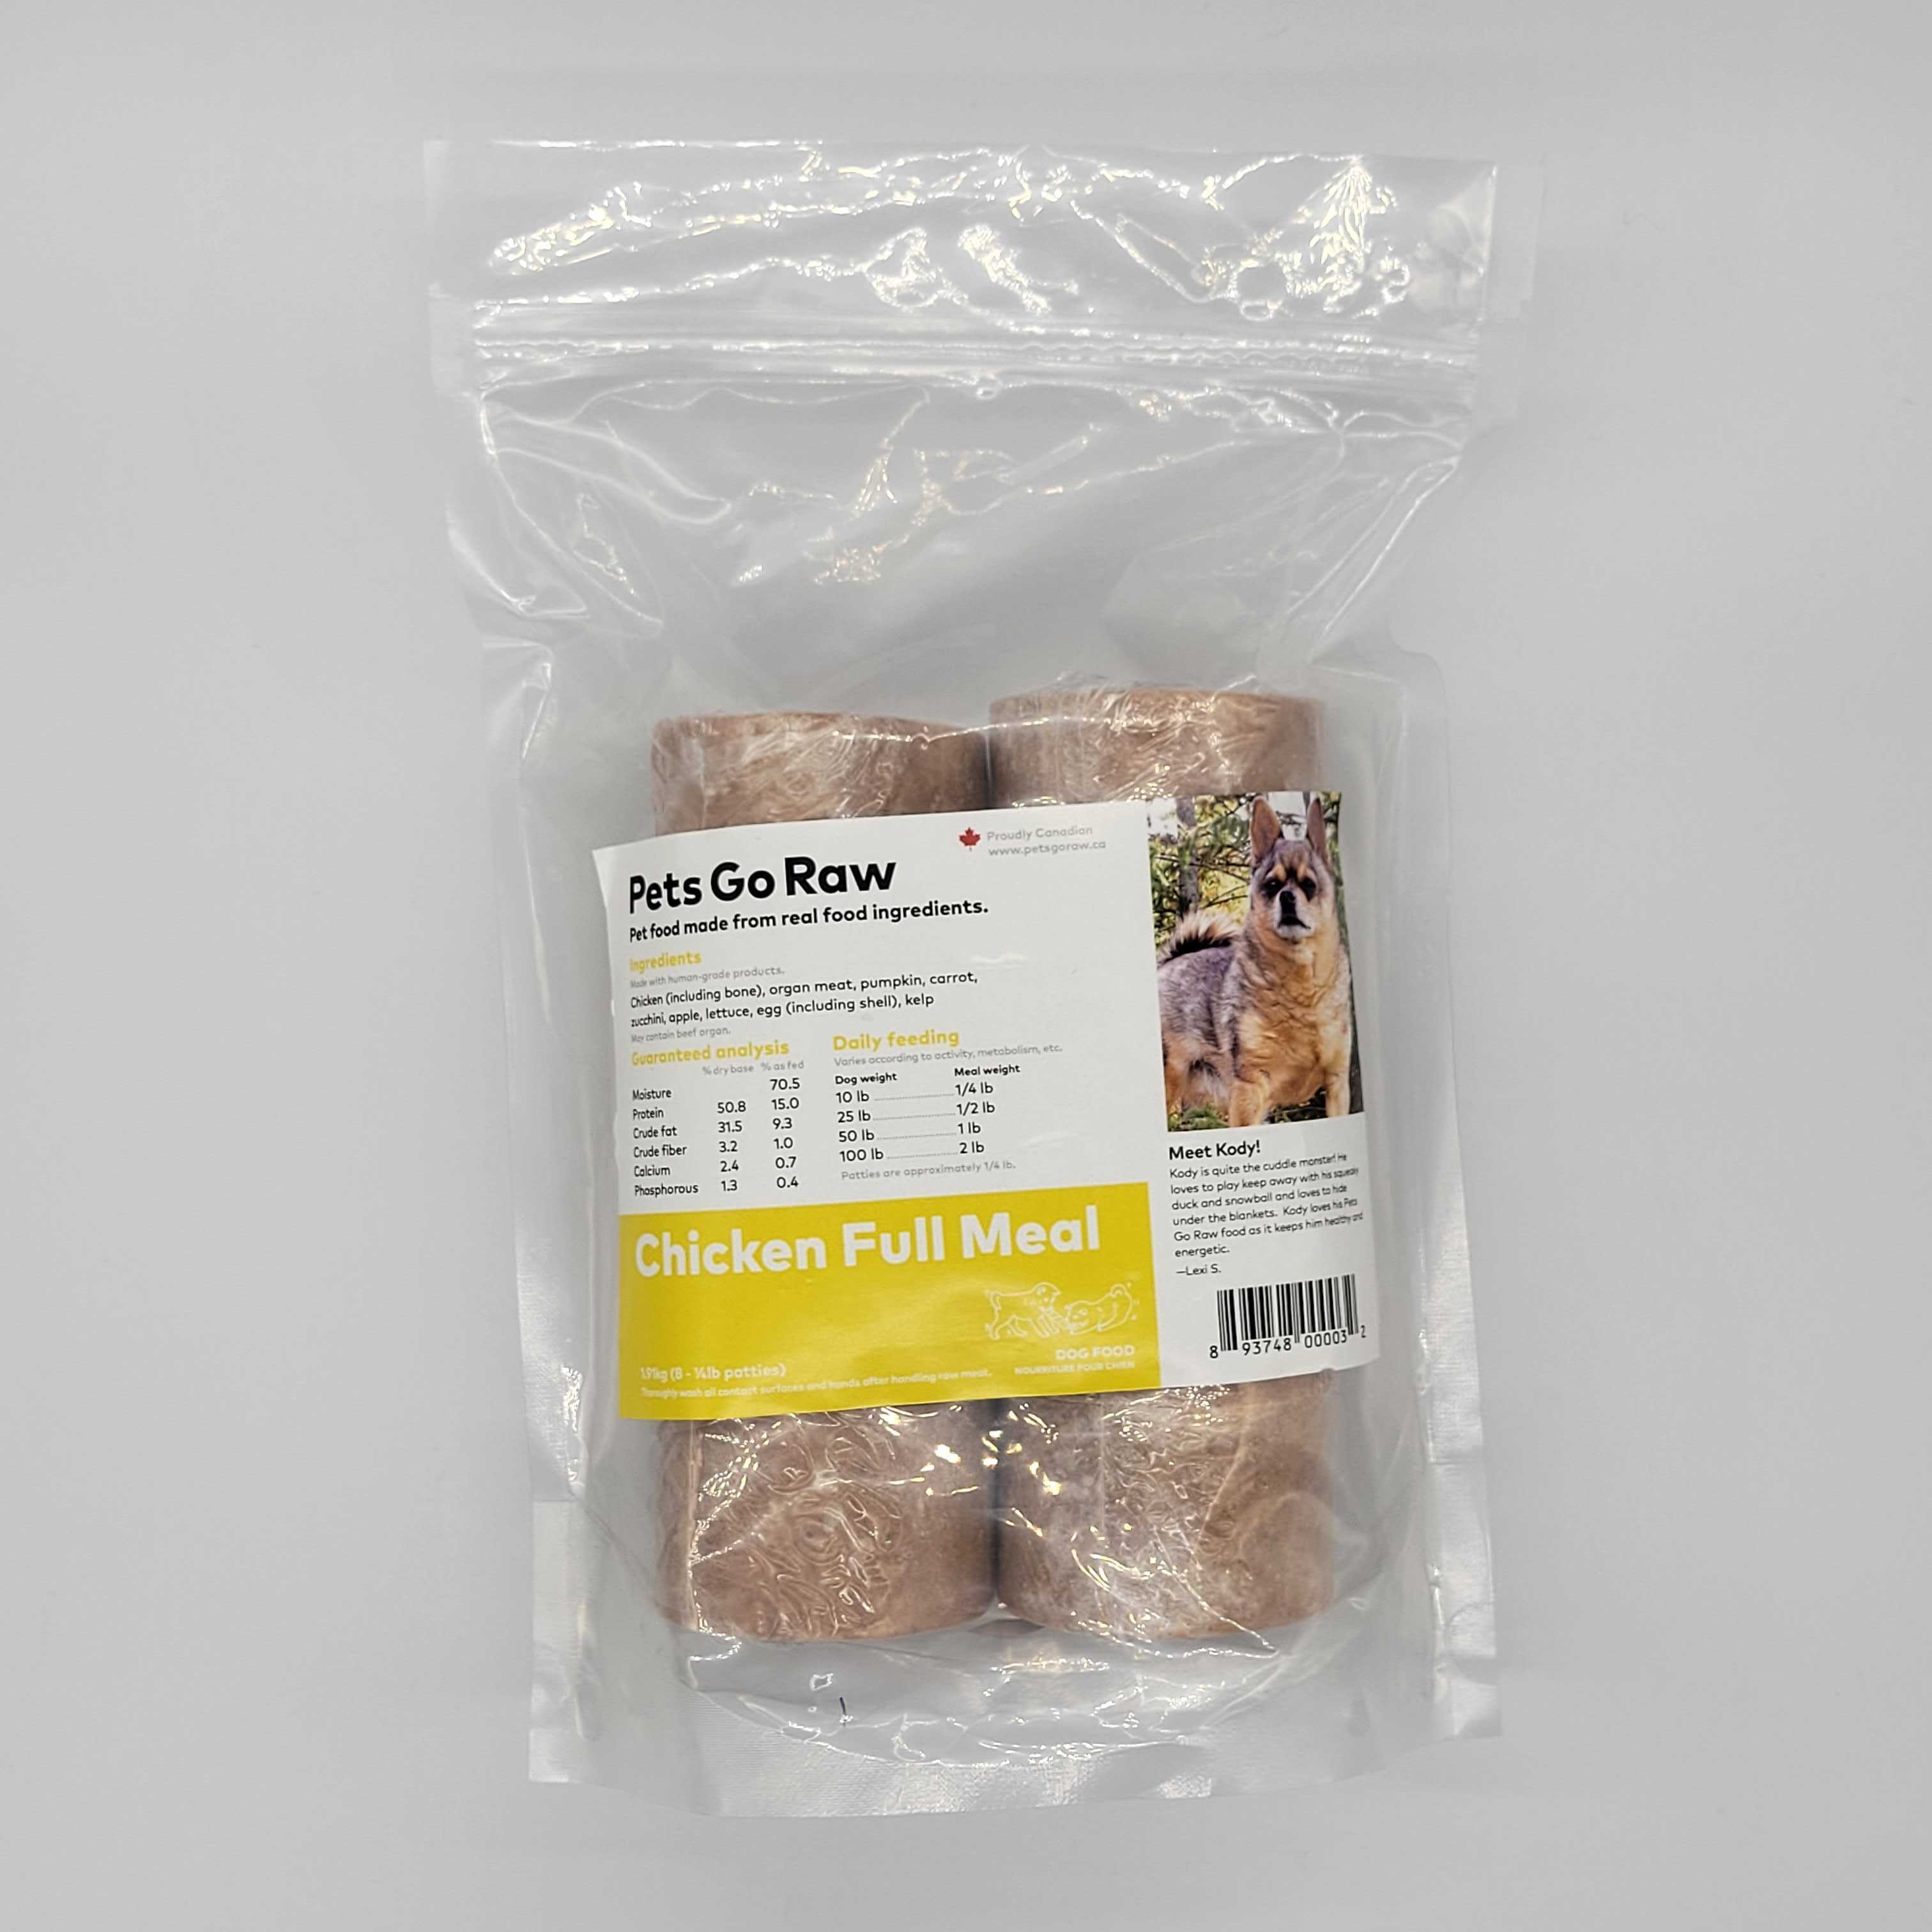 Pets Go Raw - Chicken Full Meal - 1/4lb Portions - 2lbs